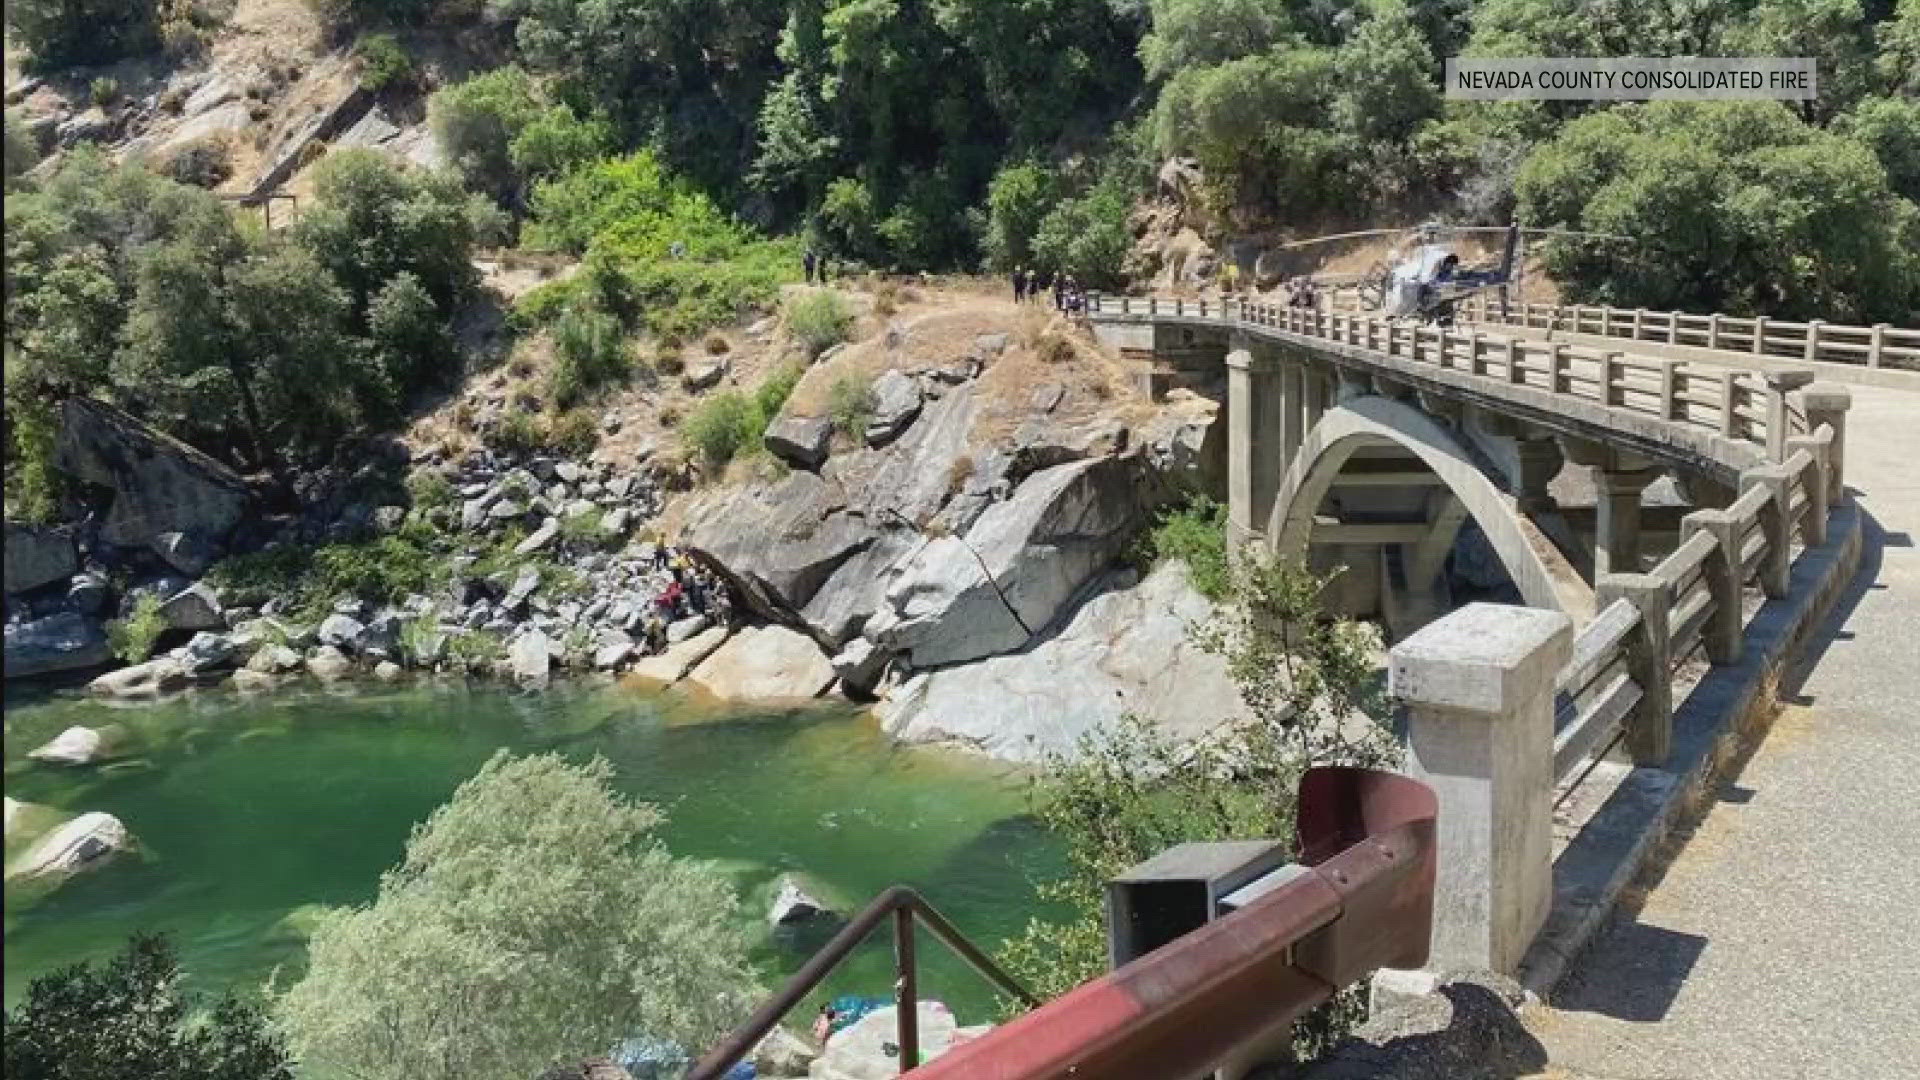 Two people drowned along the Yuba River in less than an hour in Nevada County.